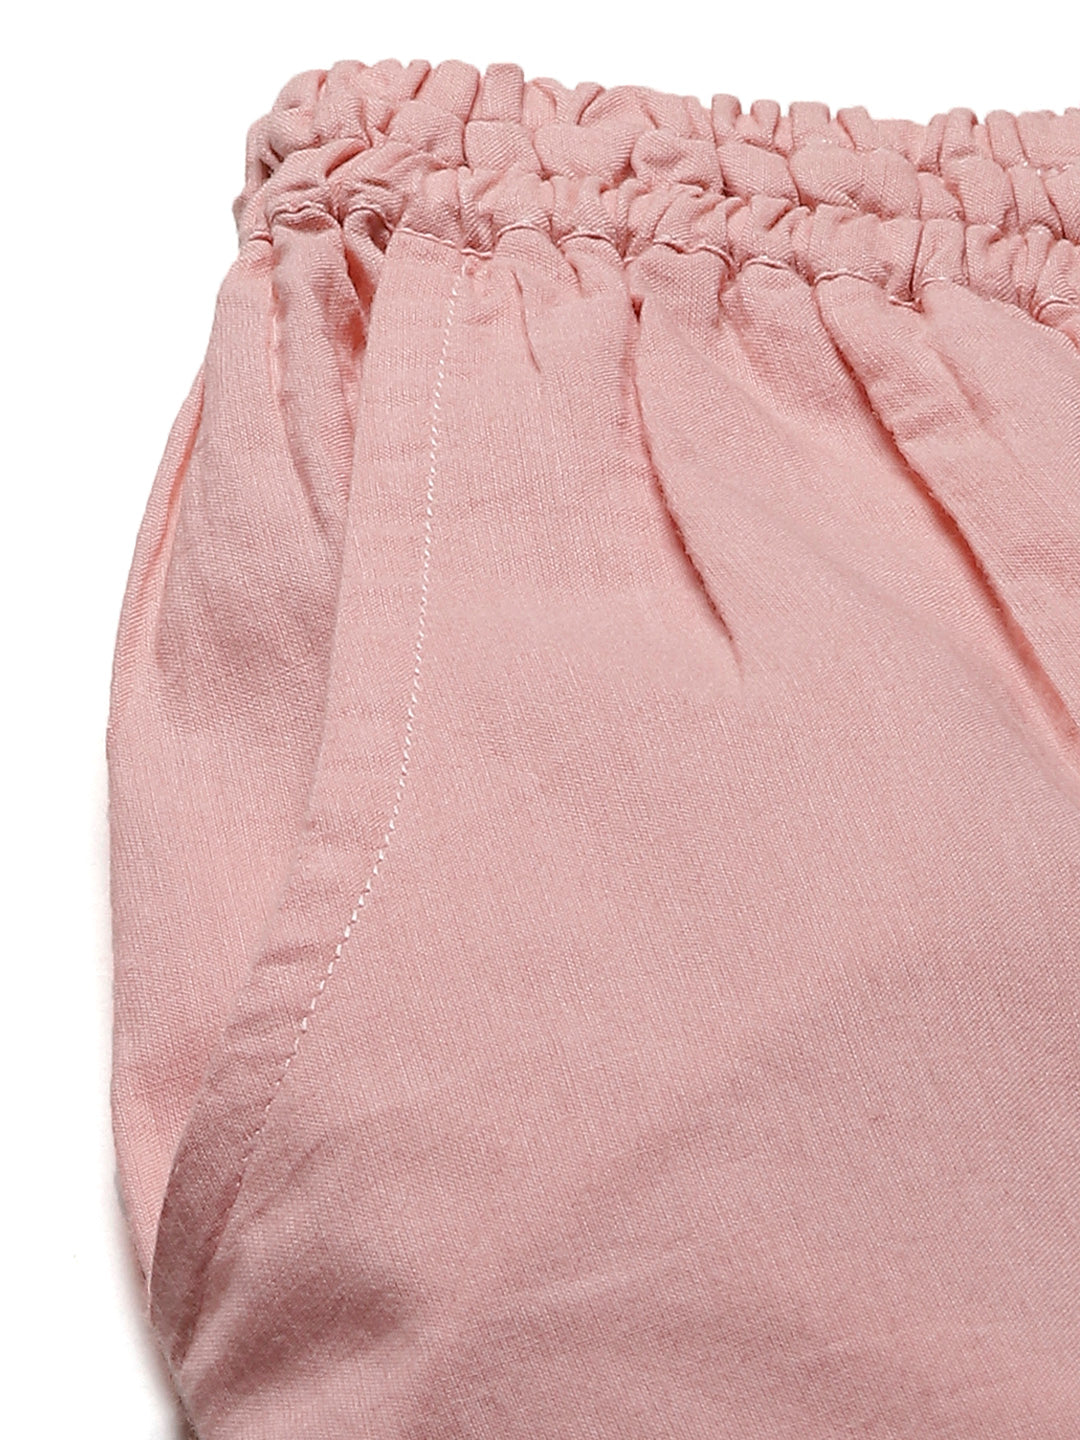 Pink Embroidered Cotton Pants